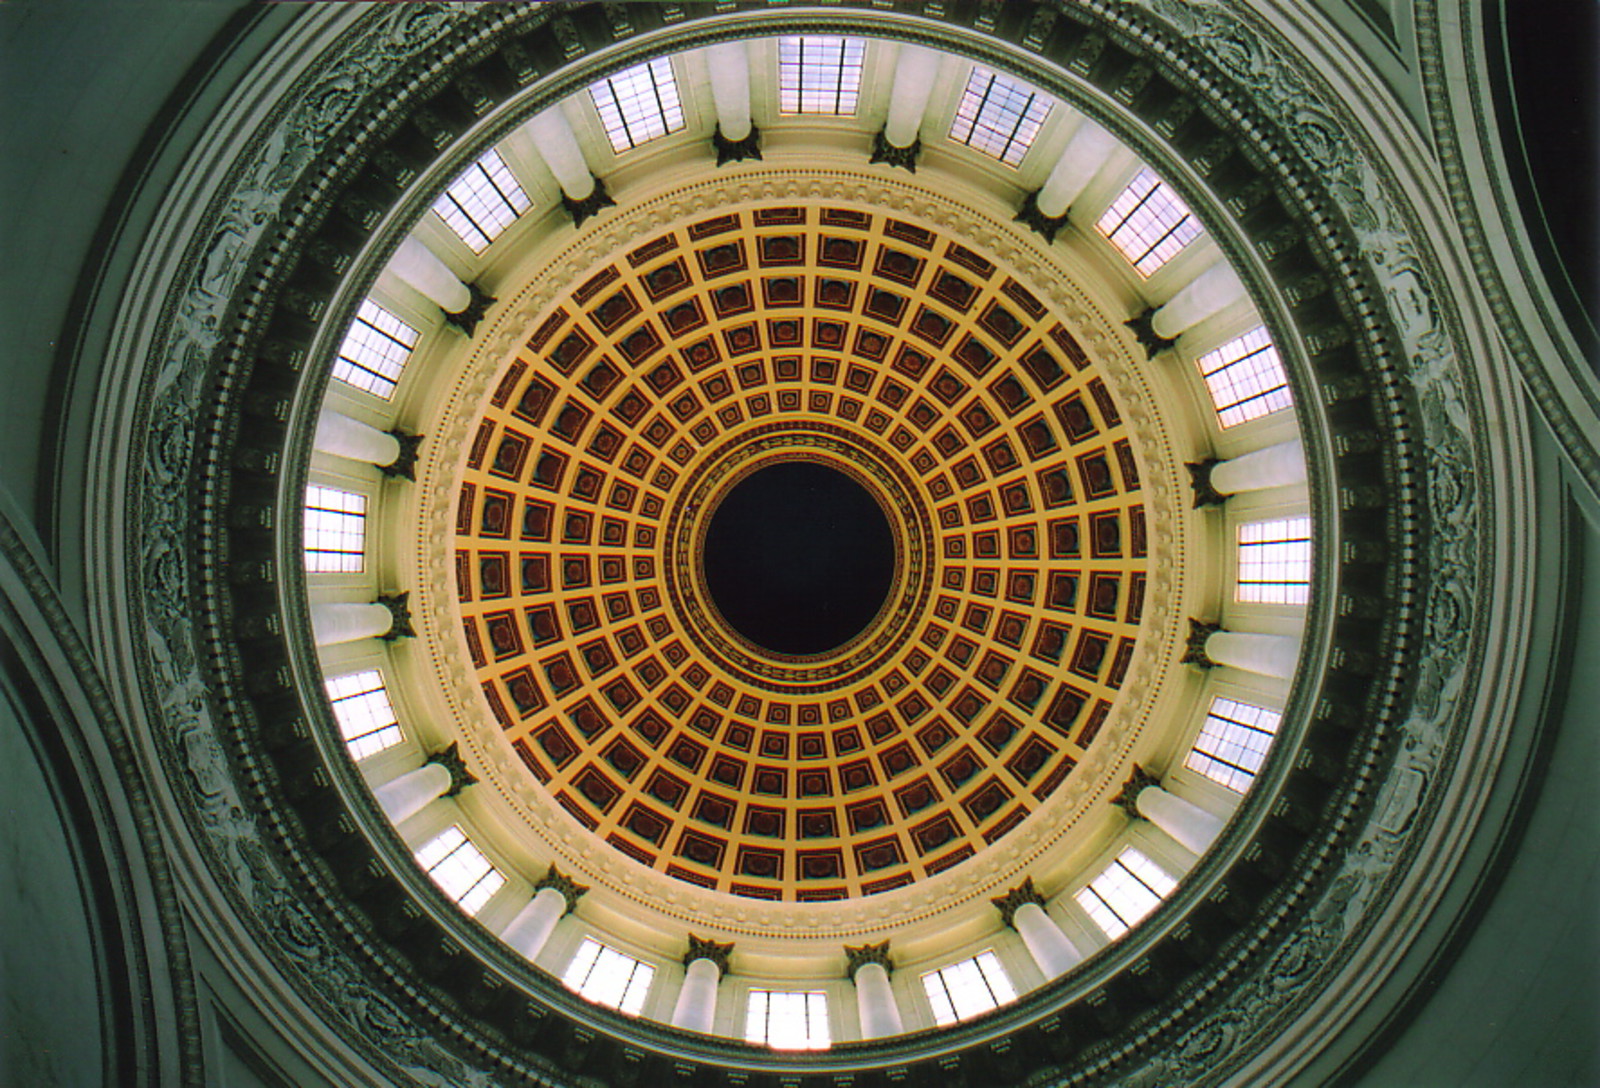 The view up into the dome of the Capitolio